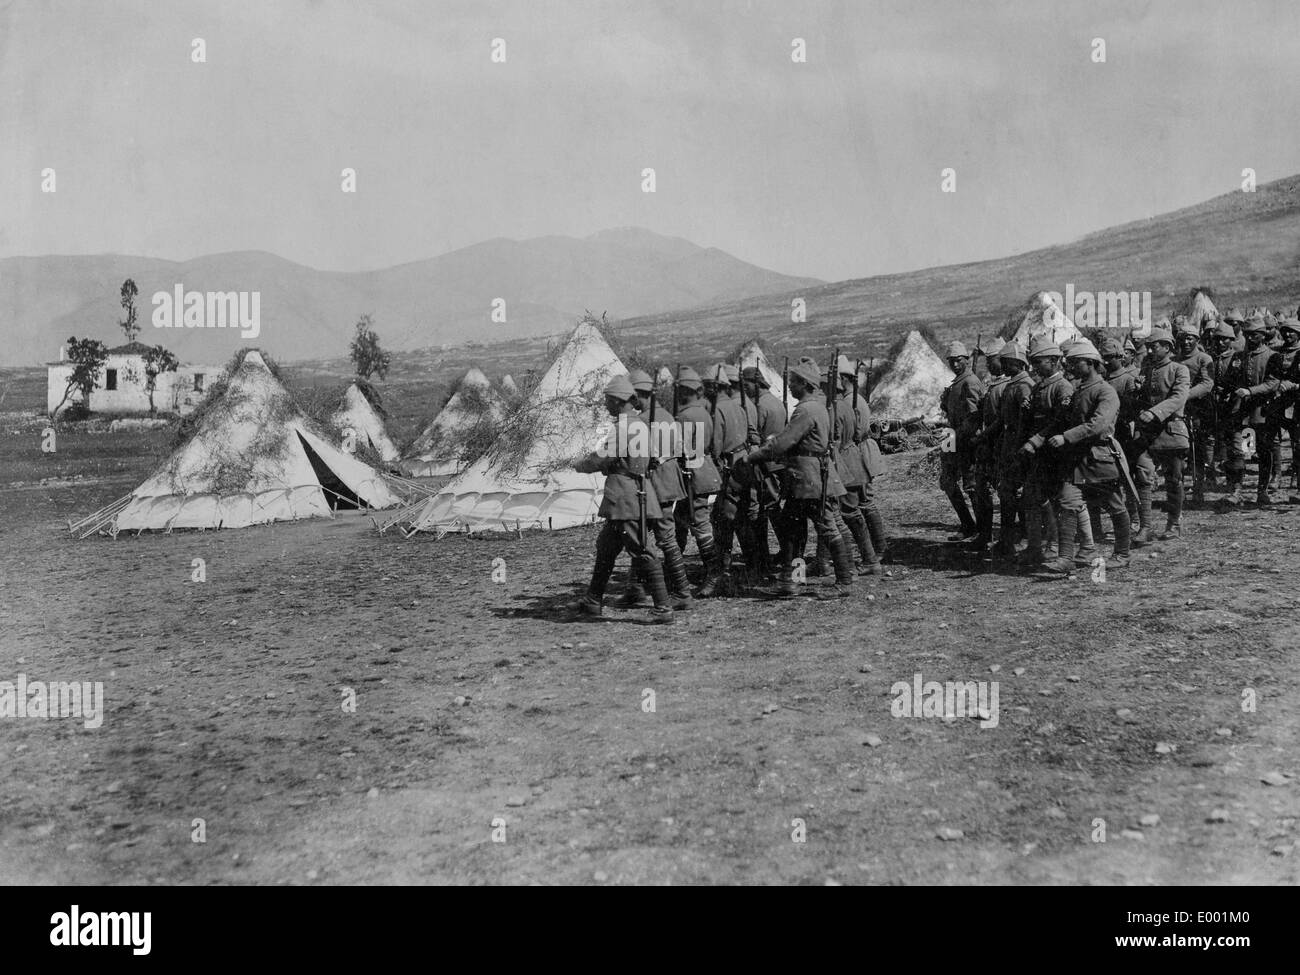 Turkish troops during education in World War I, 1917 Stock Photo